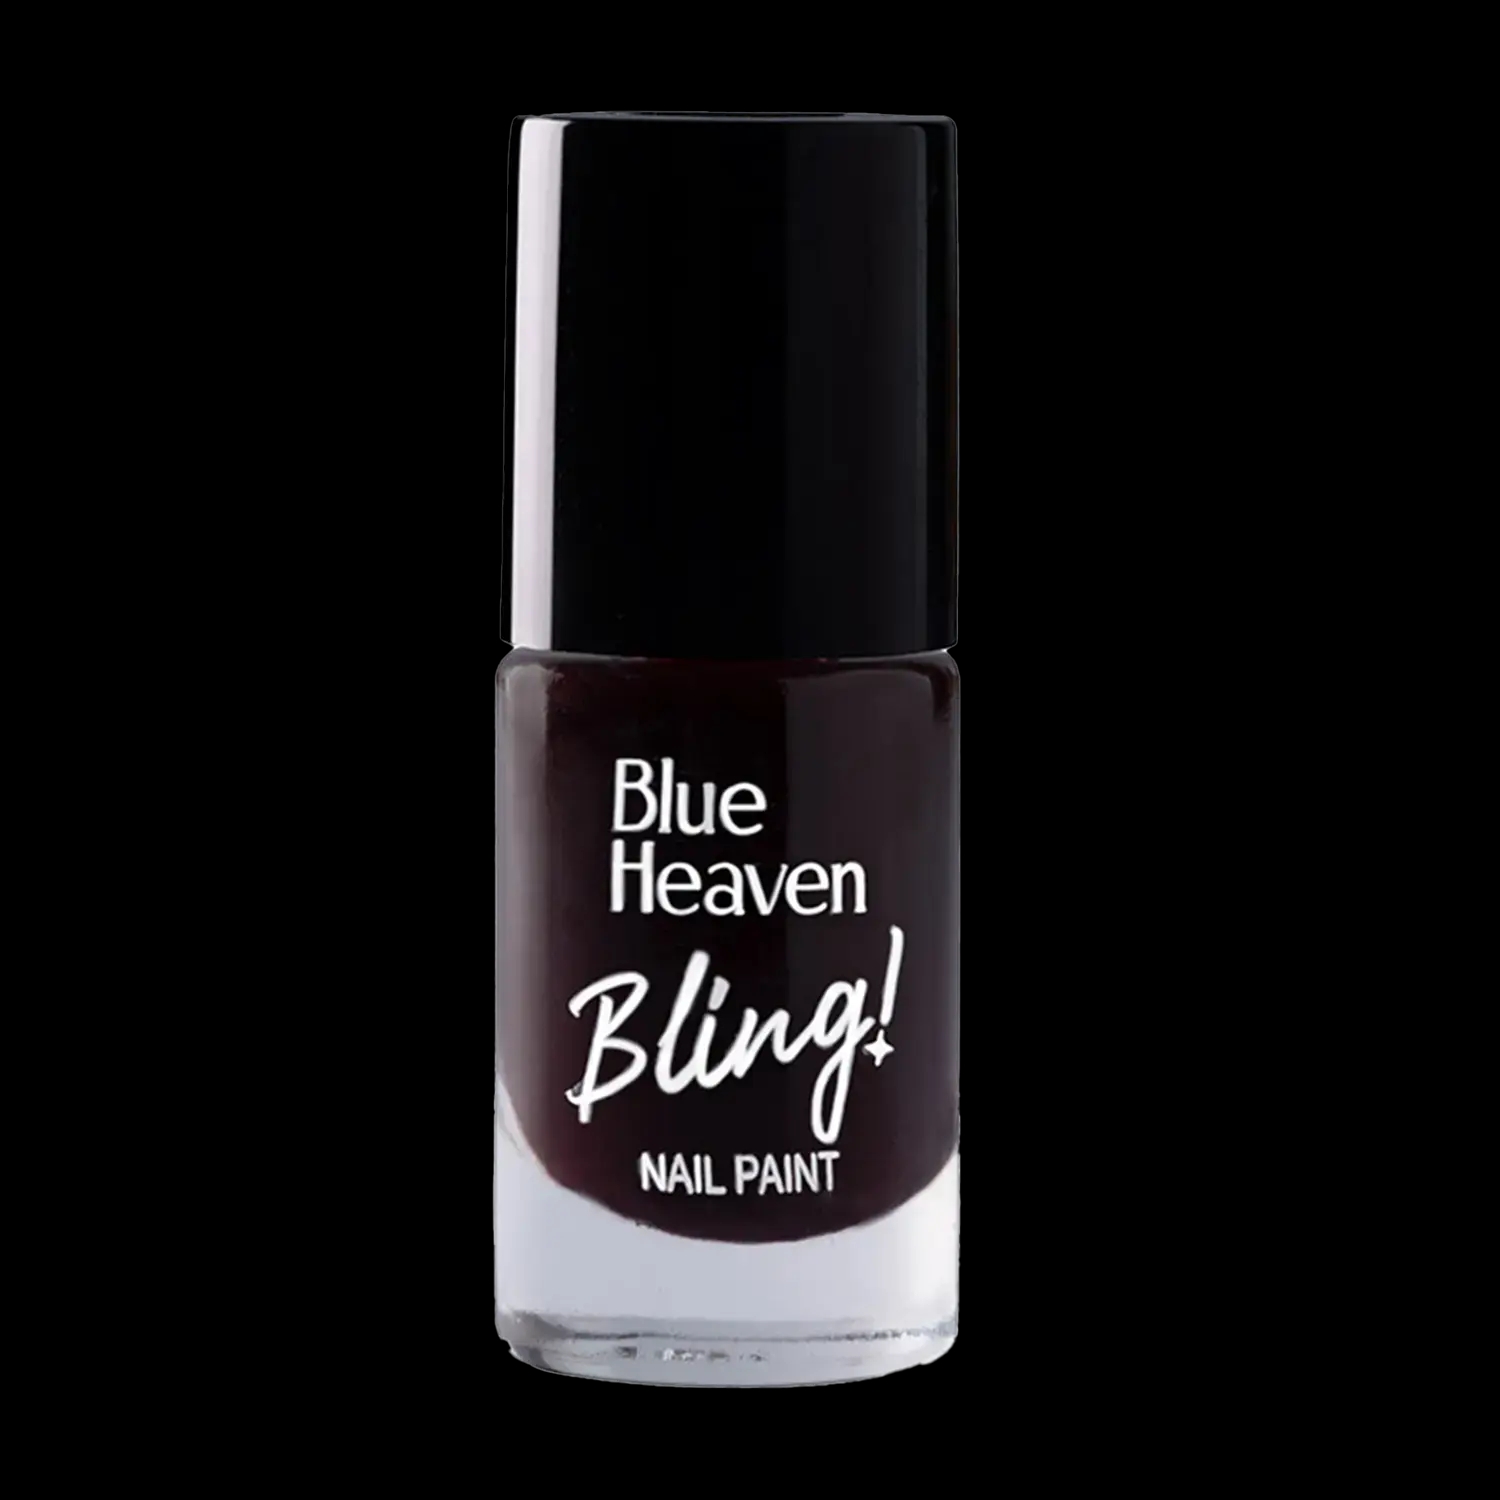 Blue Heaven Hypergel Nailpaint - Glam Pink, 403, 11ml : Buy Online at Best  Price in KSA - Souq is now Amazon.sa: Beauty